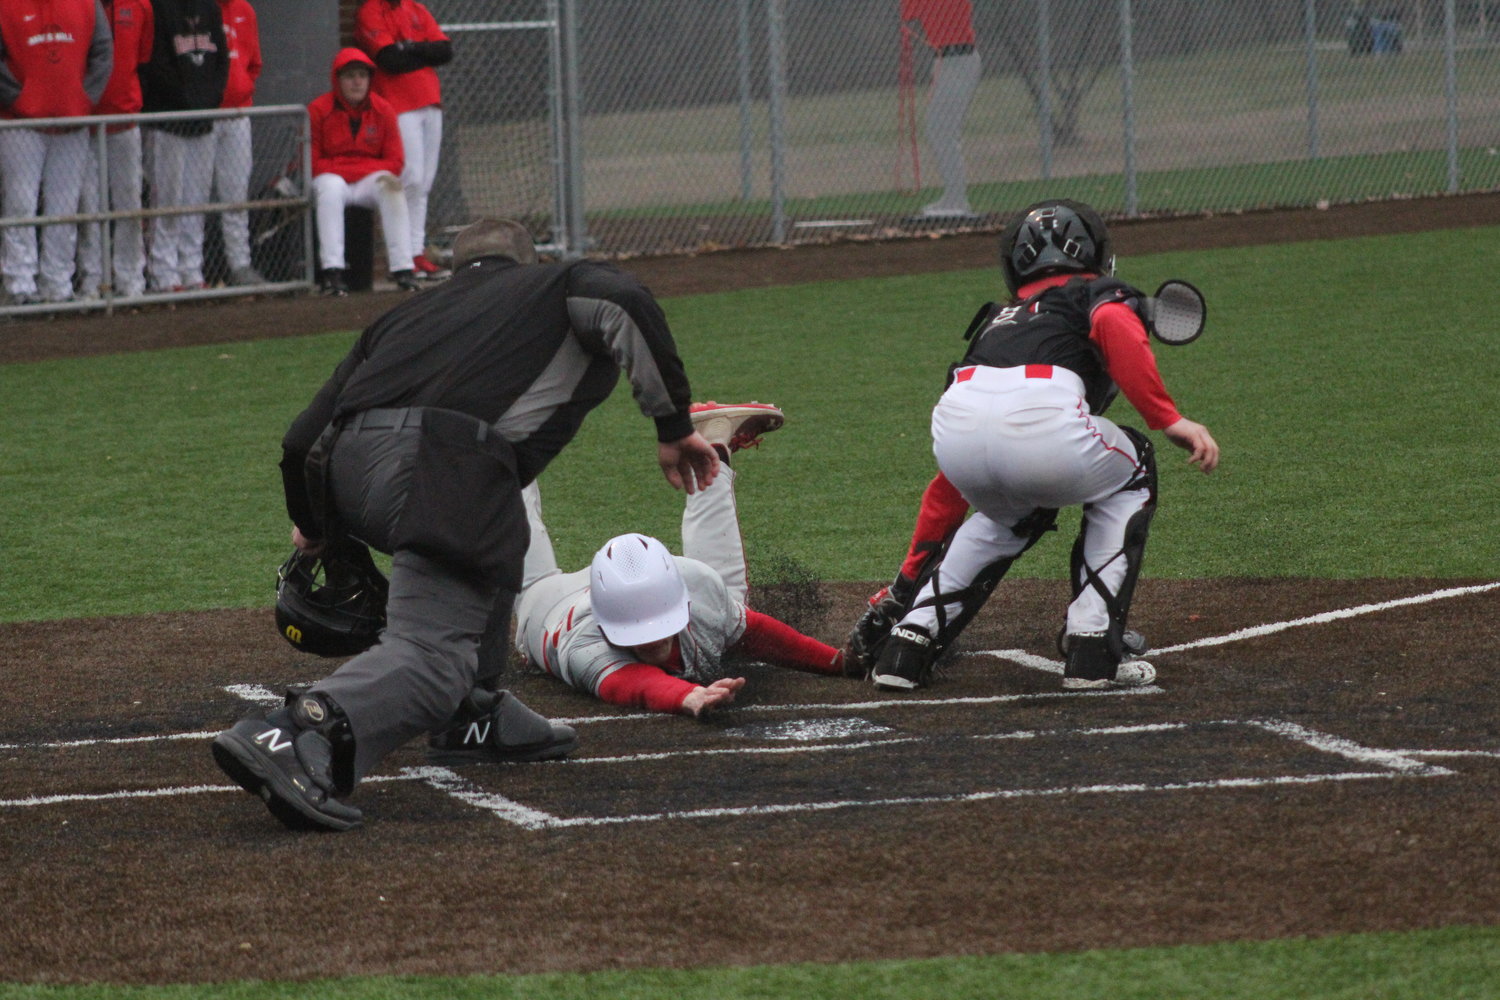 Mexico senior Matt McCurdy slides into home plate against Marshall on Thursday at home. McCurdy was ruled out but had a two-run double in the game.